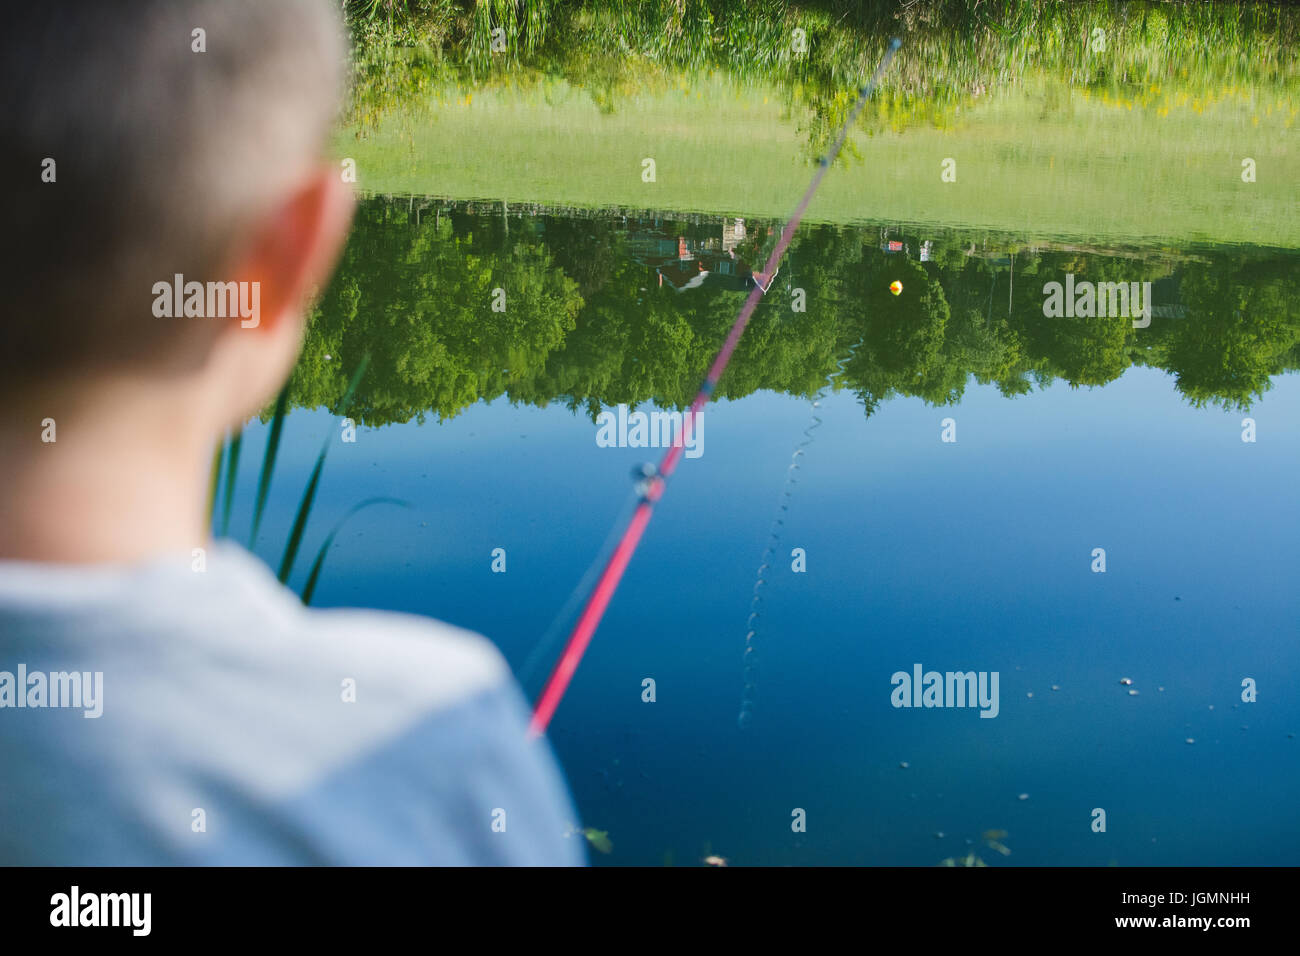 A child fishing at a pond in a rural area. Stock Photo